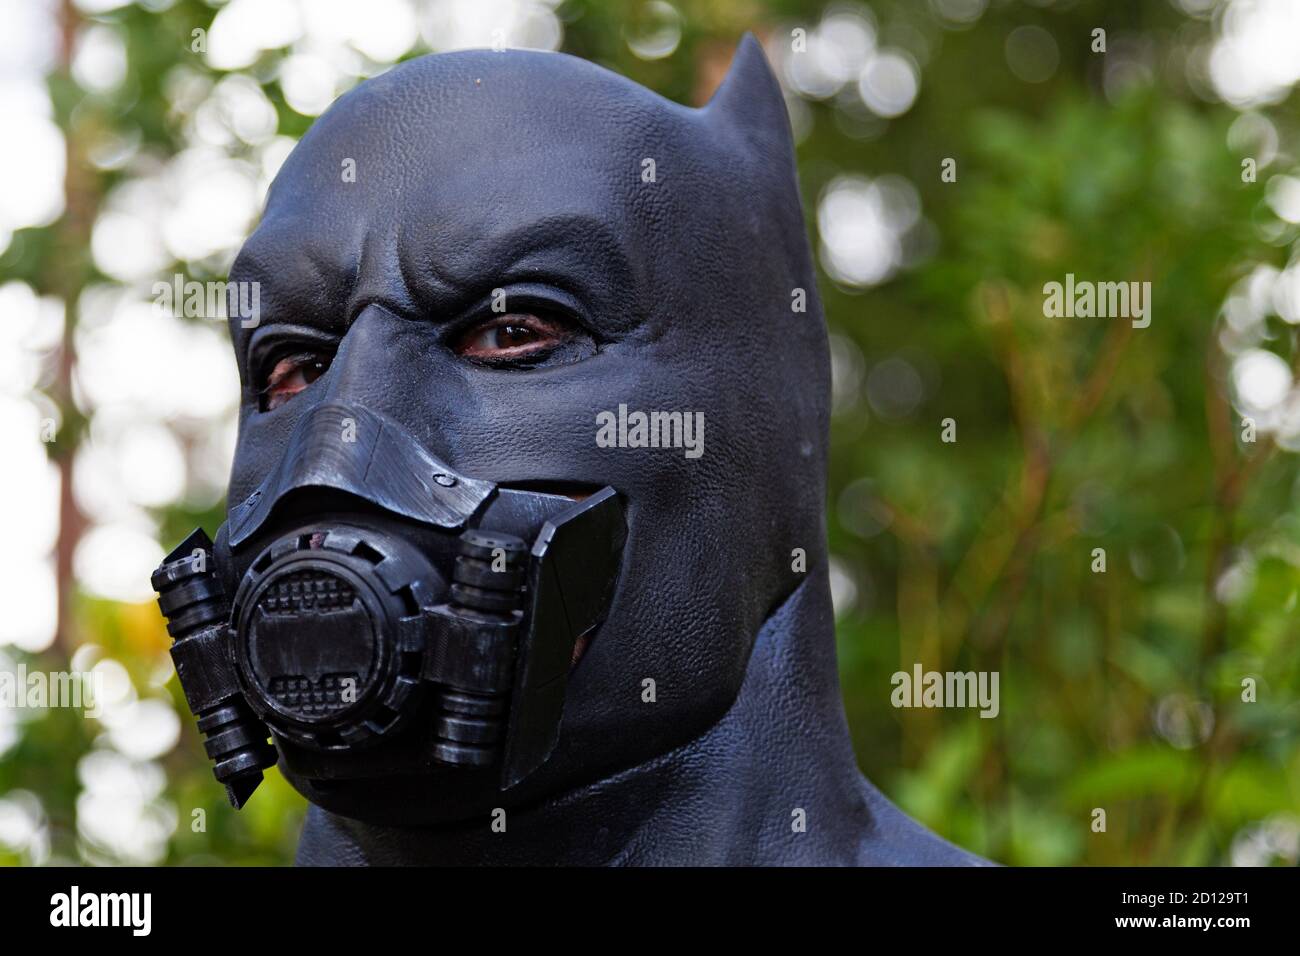 Umea, Norrland Sweden - September 5, 2020: Batman with breathing mask in the forest Stock Photo